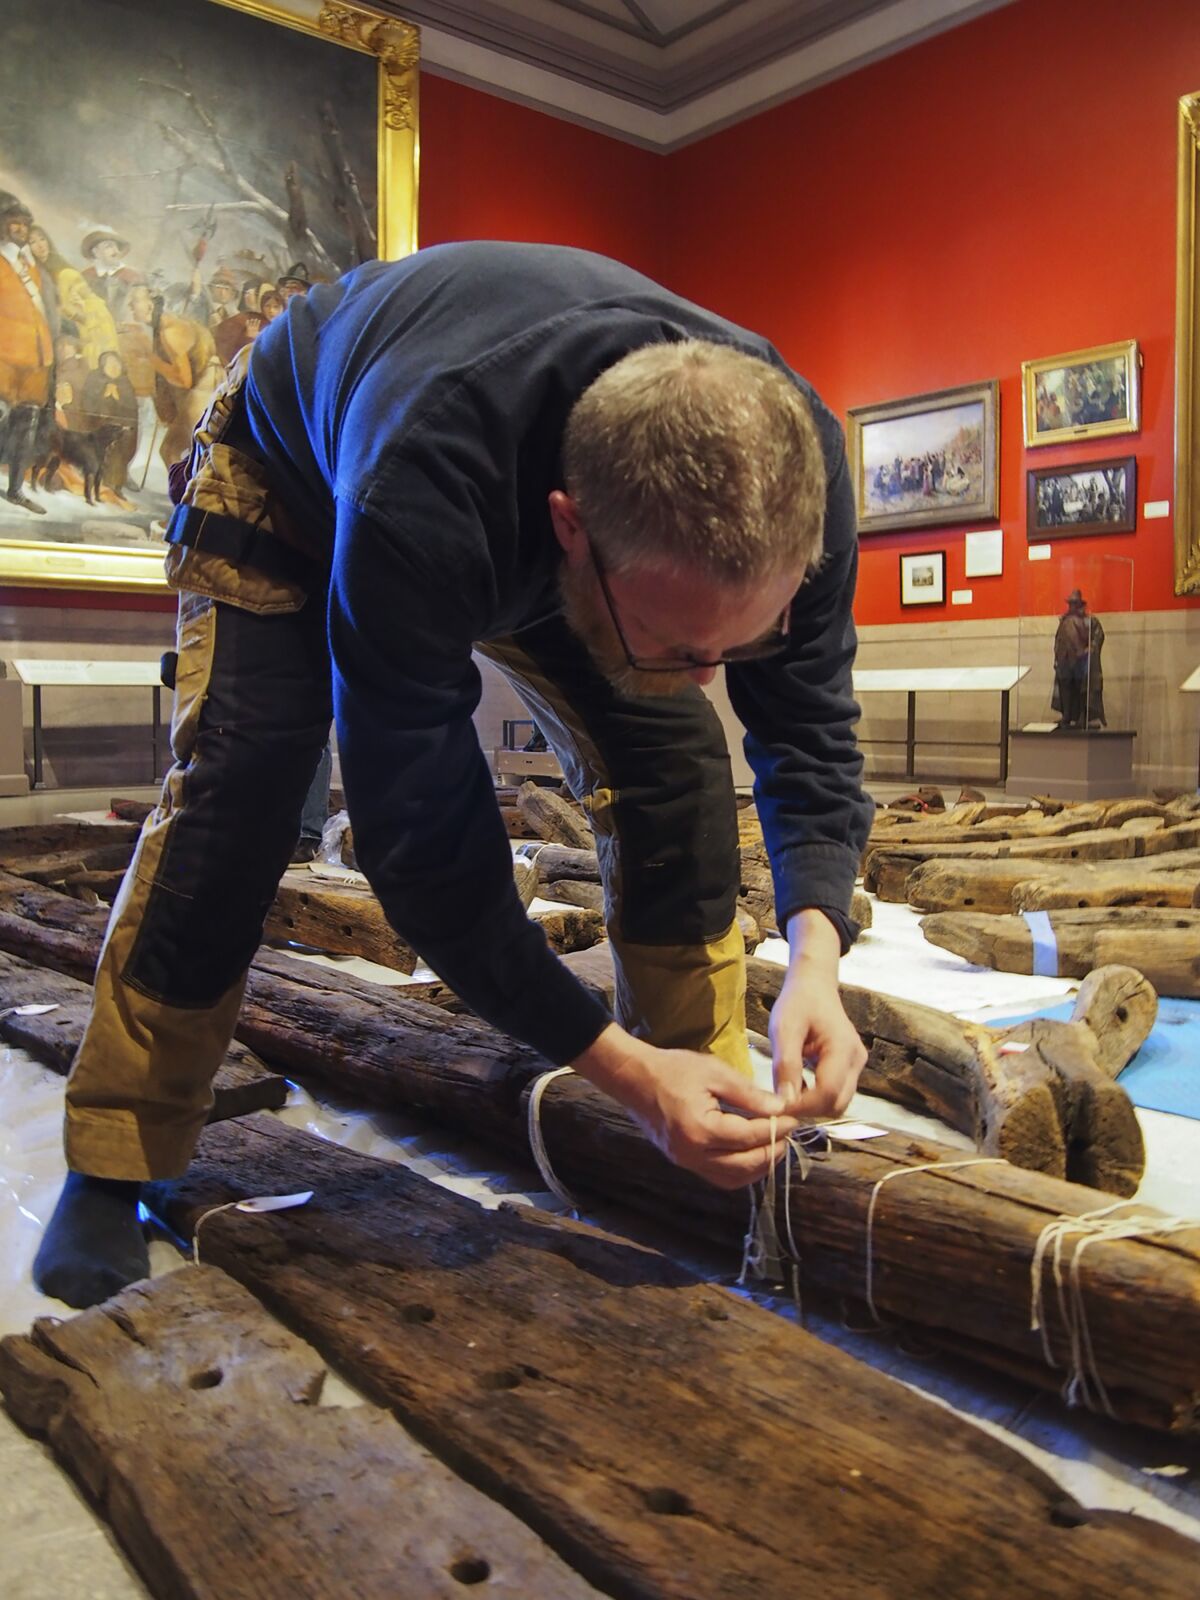 In this Jan. 2018 photo provided by the Pilgrim Hall Museum, Dr. Fred Hocker, Director of Research, Vasa Museum, Stockholm, Sweden, examines Sparrow-hawk timbers at Pilgrim Hall Museum, in Plymouth, Mass. The timbers were sampled in 2018 and analyzed over the course of several years. (Marie Pelletier/Pilgrim Hall Museum photo via AP)